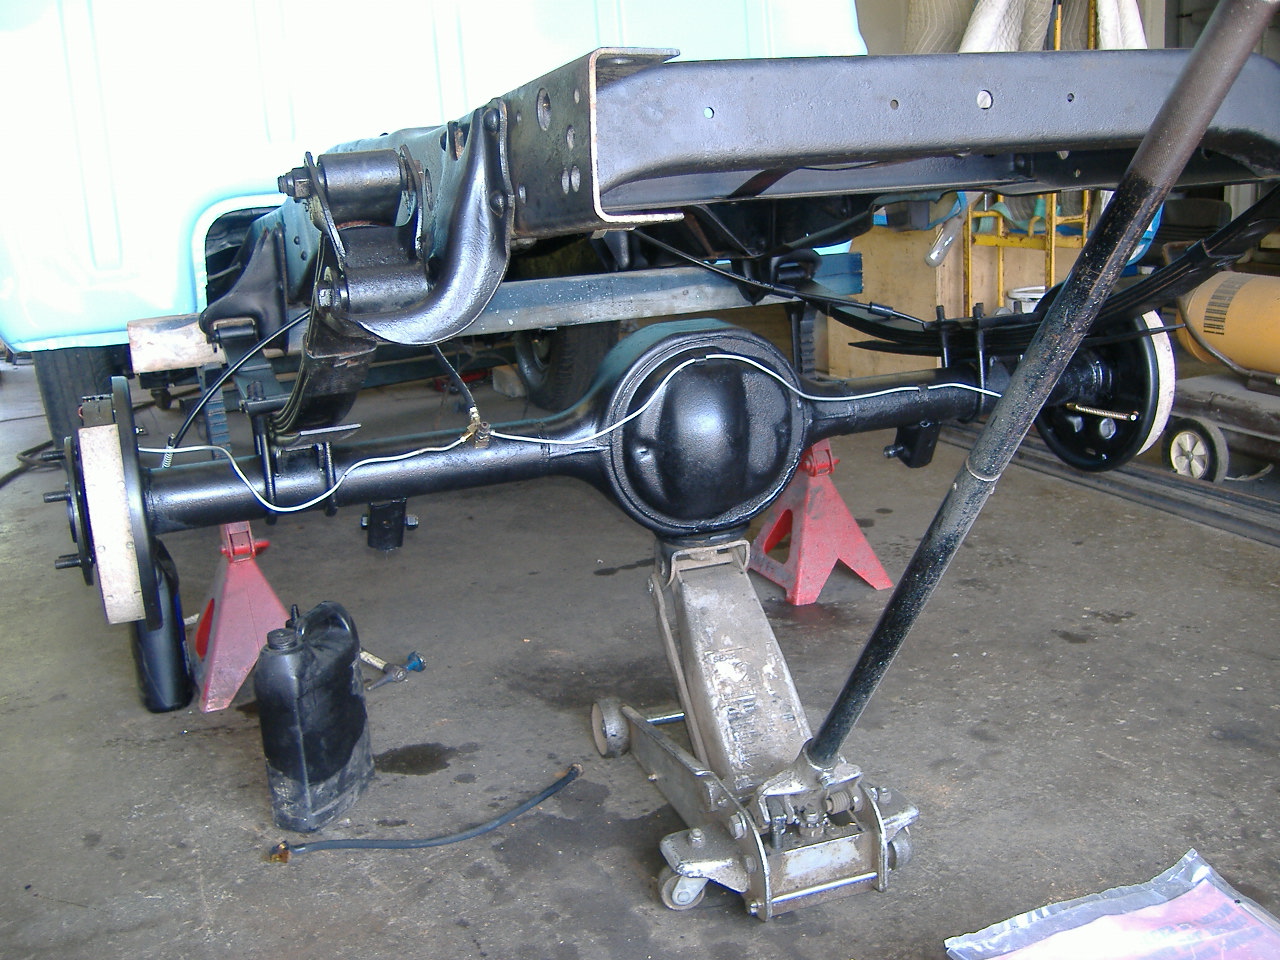 Ford Ranger Rear Axle Clunking